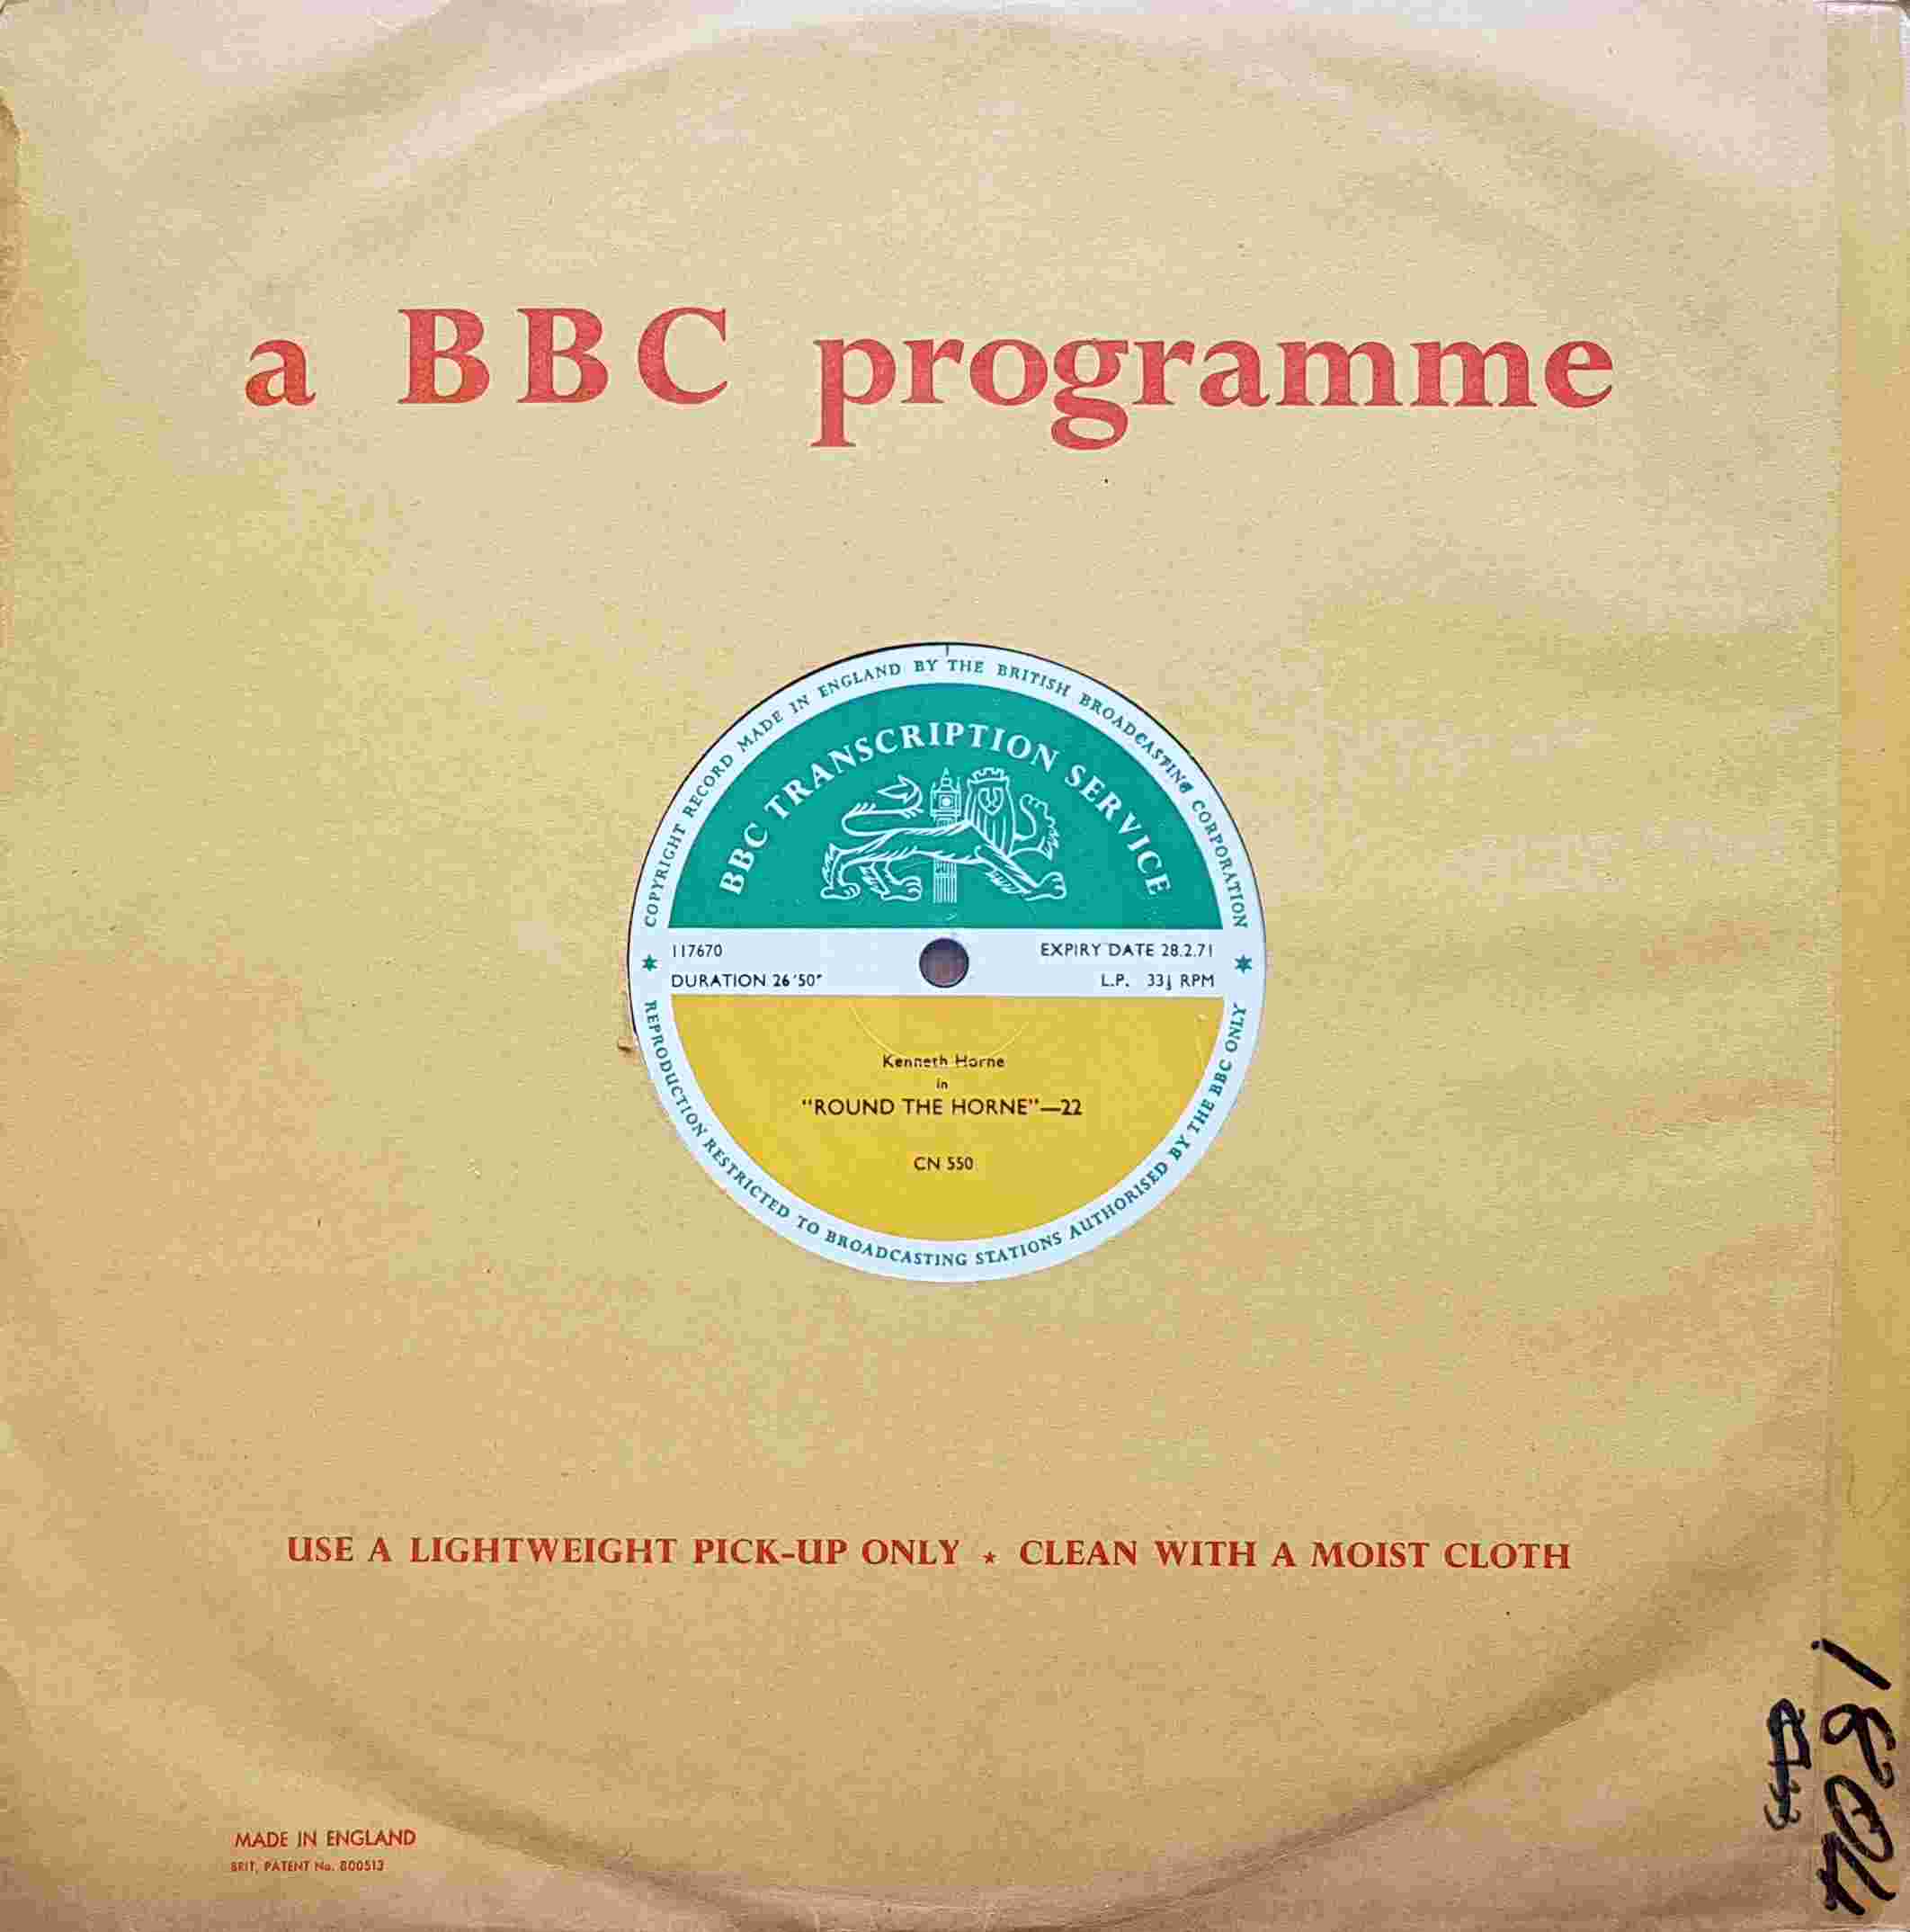 Picture of CN 550 12 Round the Horne - 22 & 23 by artist Kenneth Horne from the BBC records and Tapes library